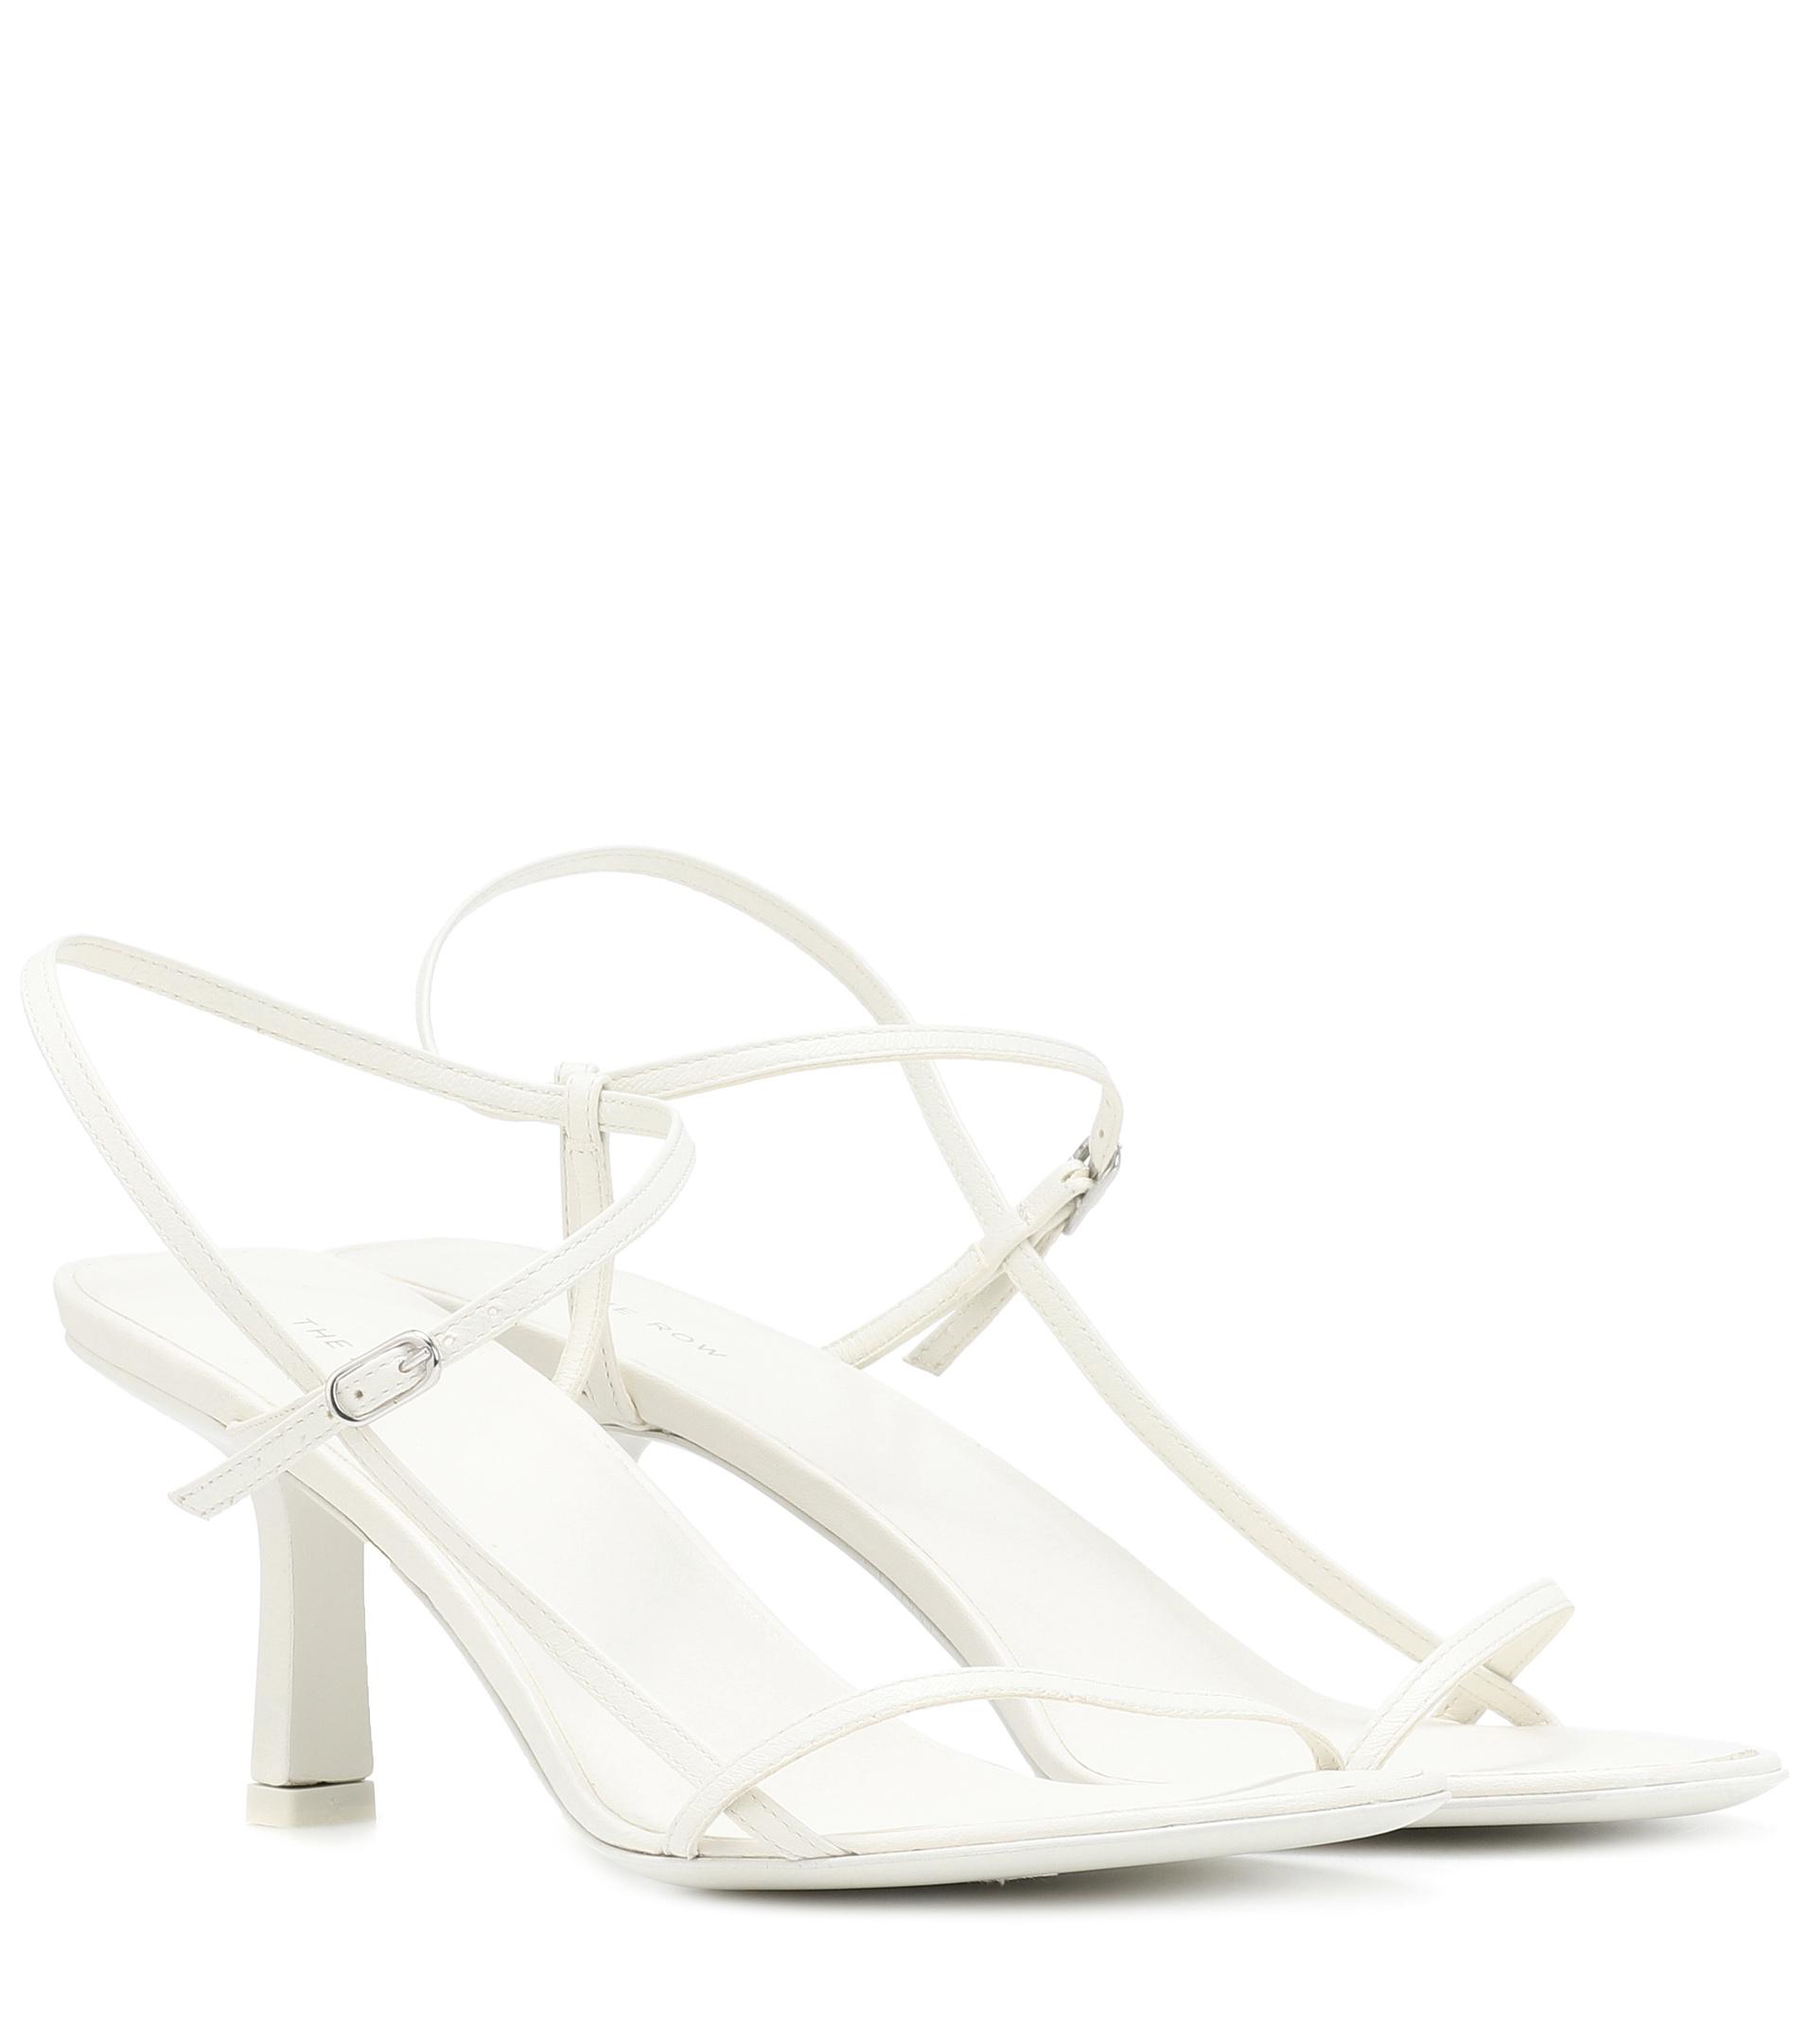 The Row Bare Leather Sandals in Bright White (White) - Lyst